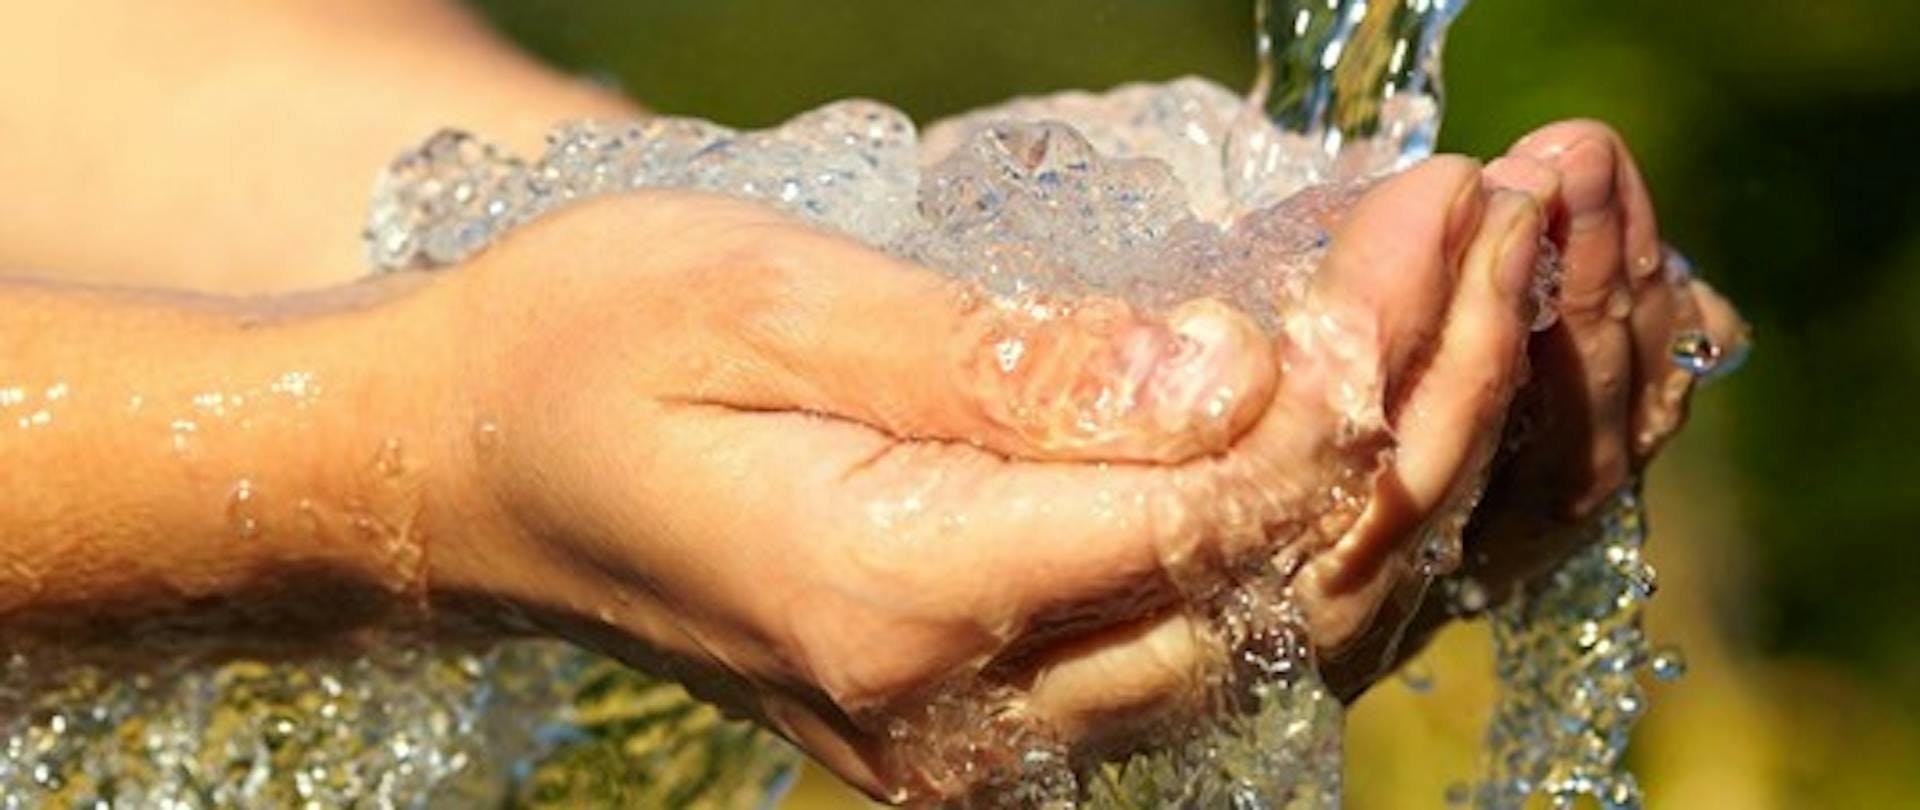 Clean Water and Healthy Living Photo of Hands Holding Clean Water